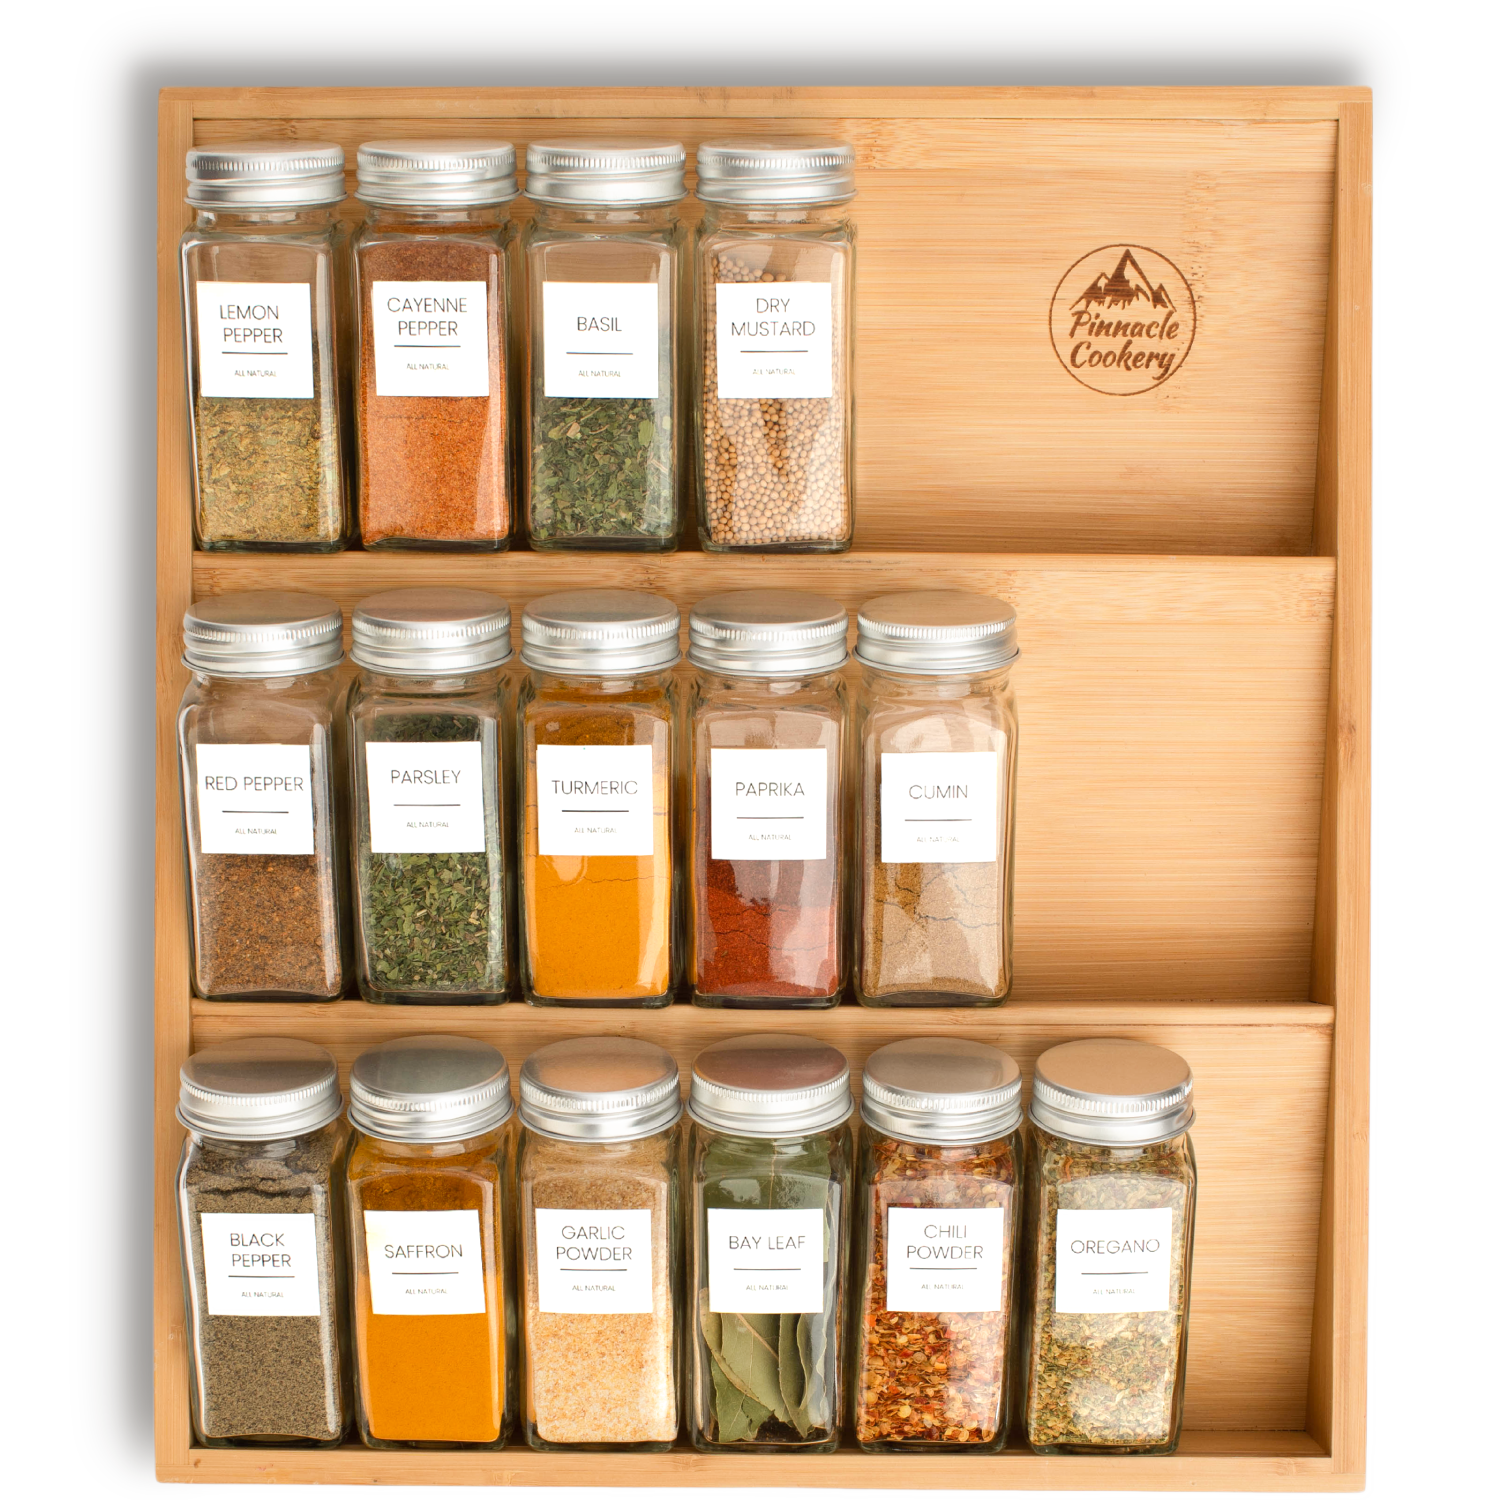 Pinnacle Cookery Bamboo Spice Rack Organizer for Countertop - Eco